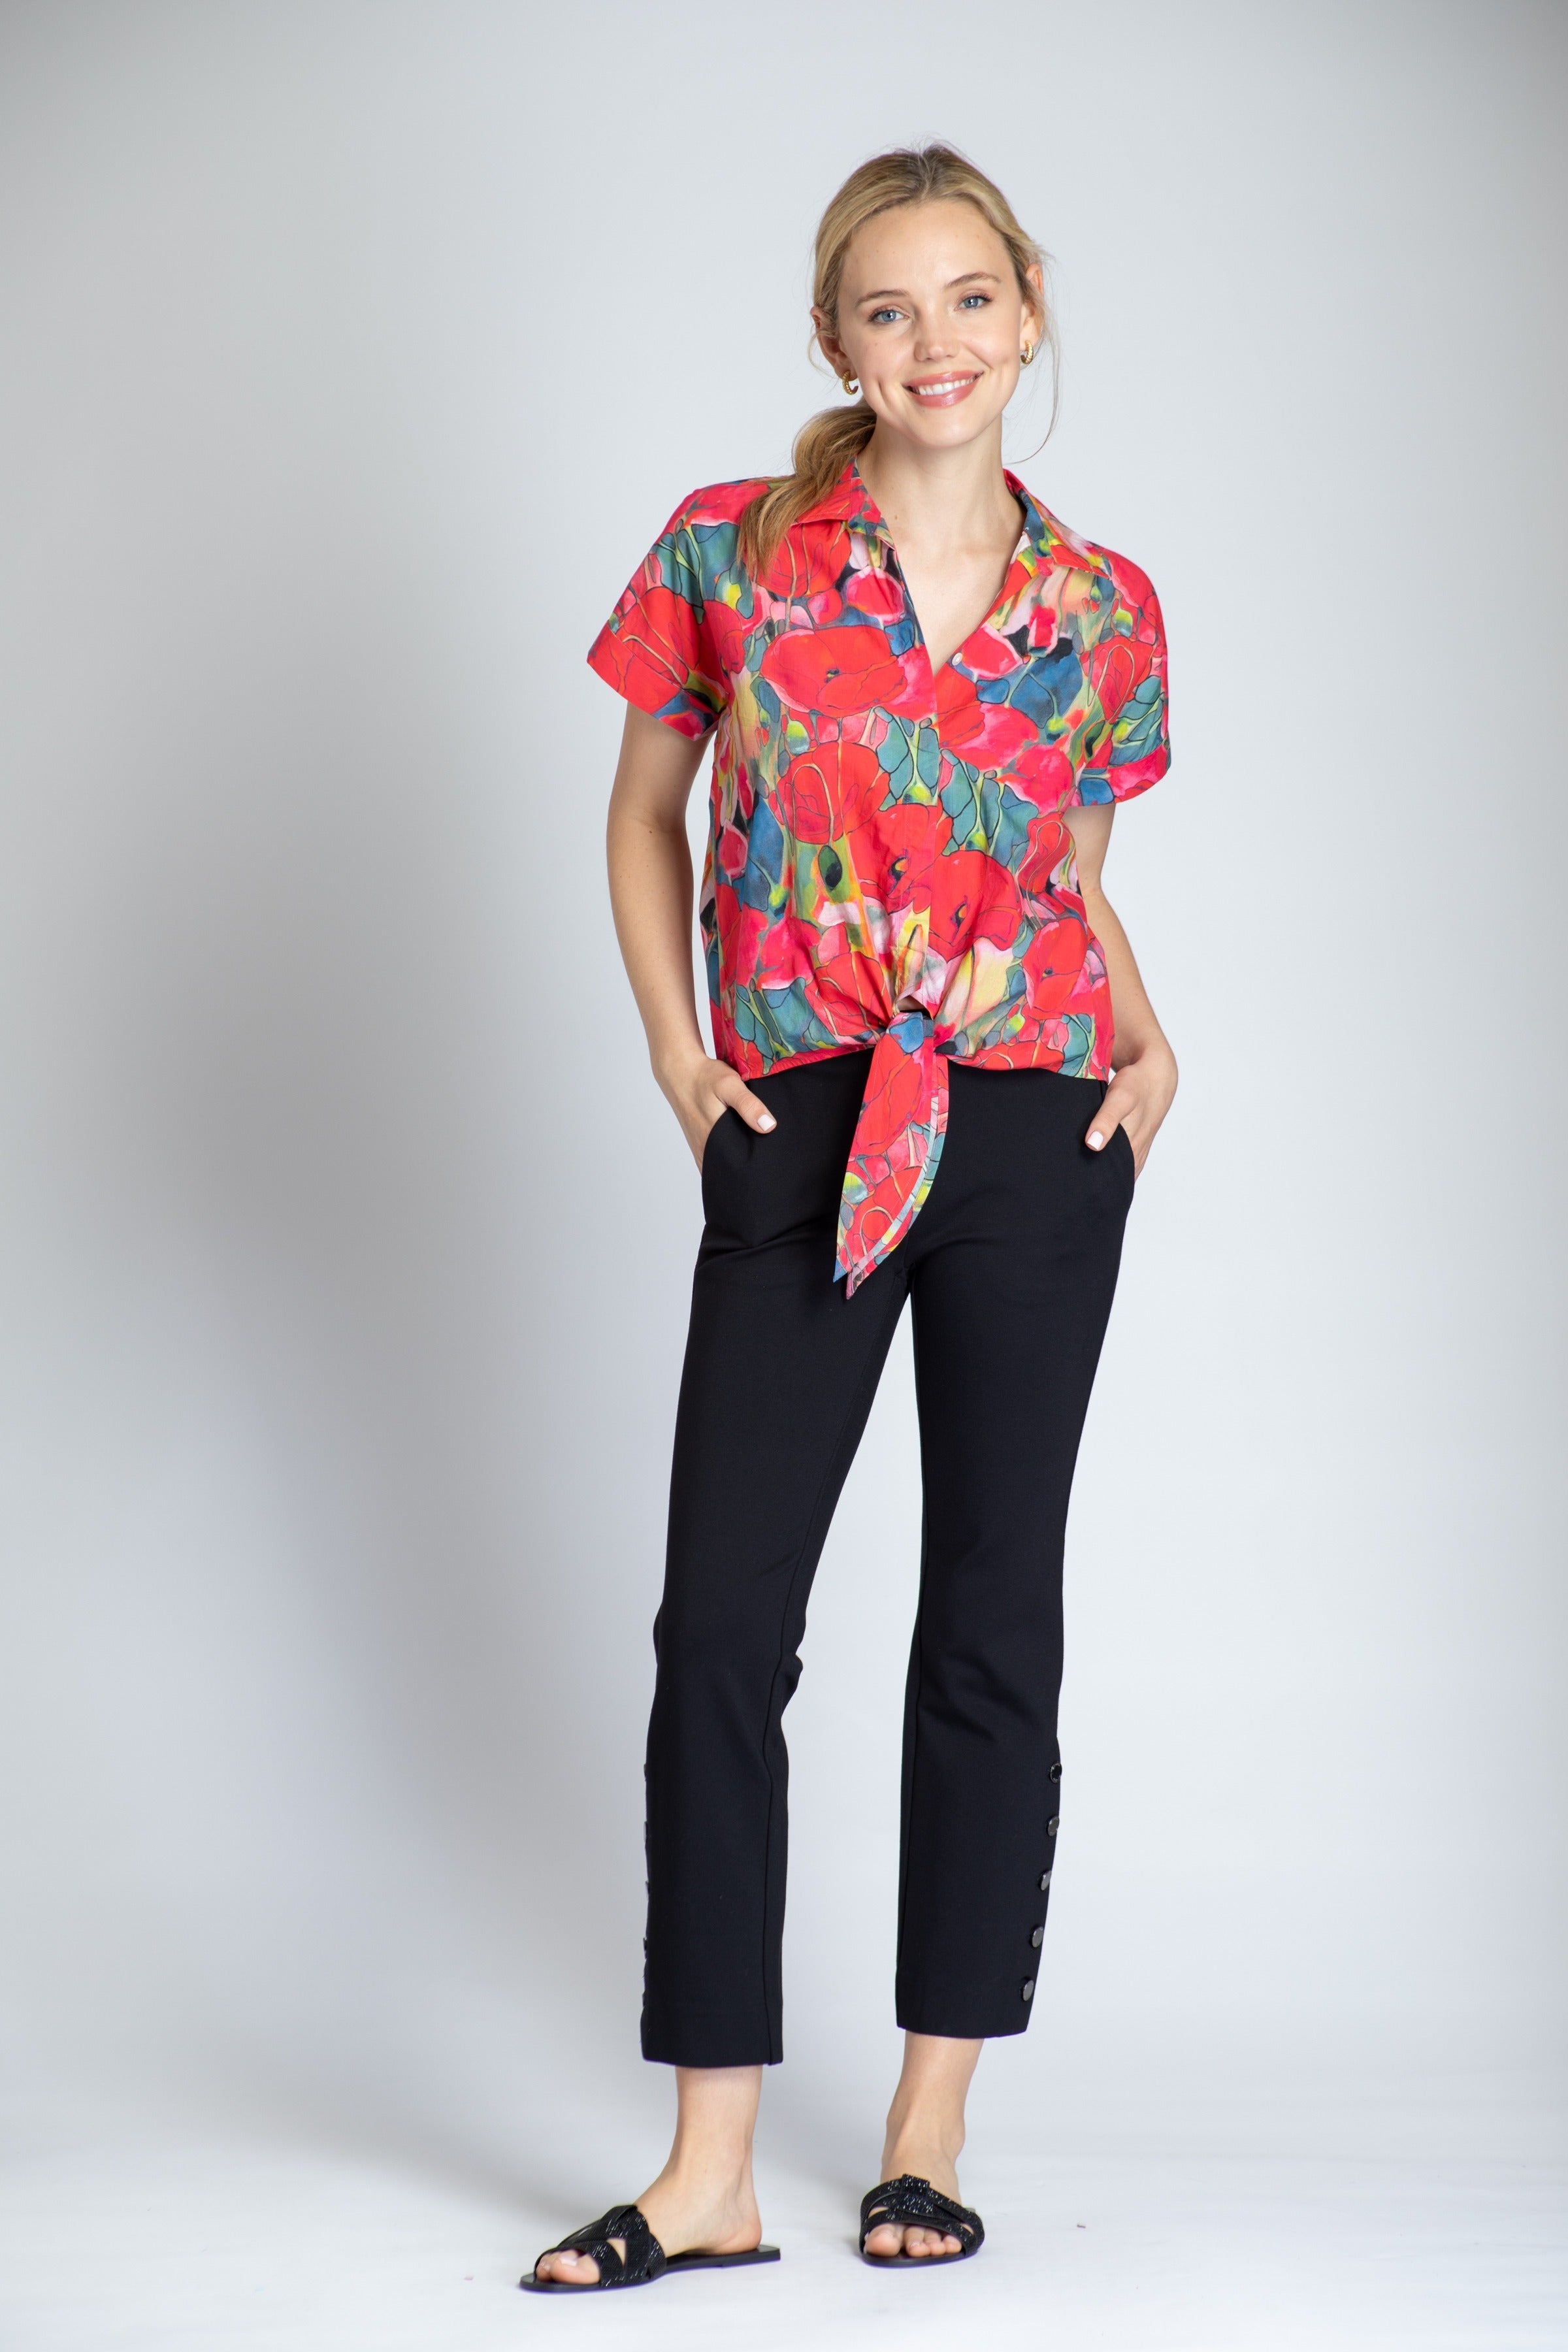 APNY Blooms Tie Front Blouse